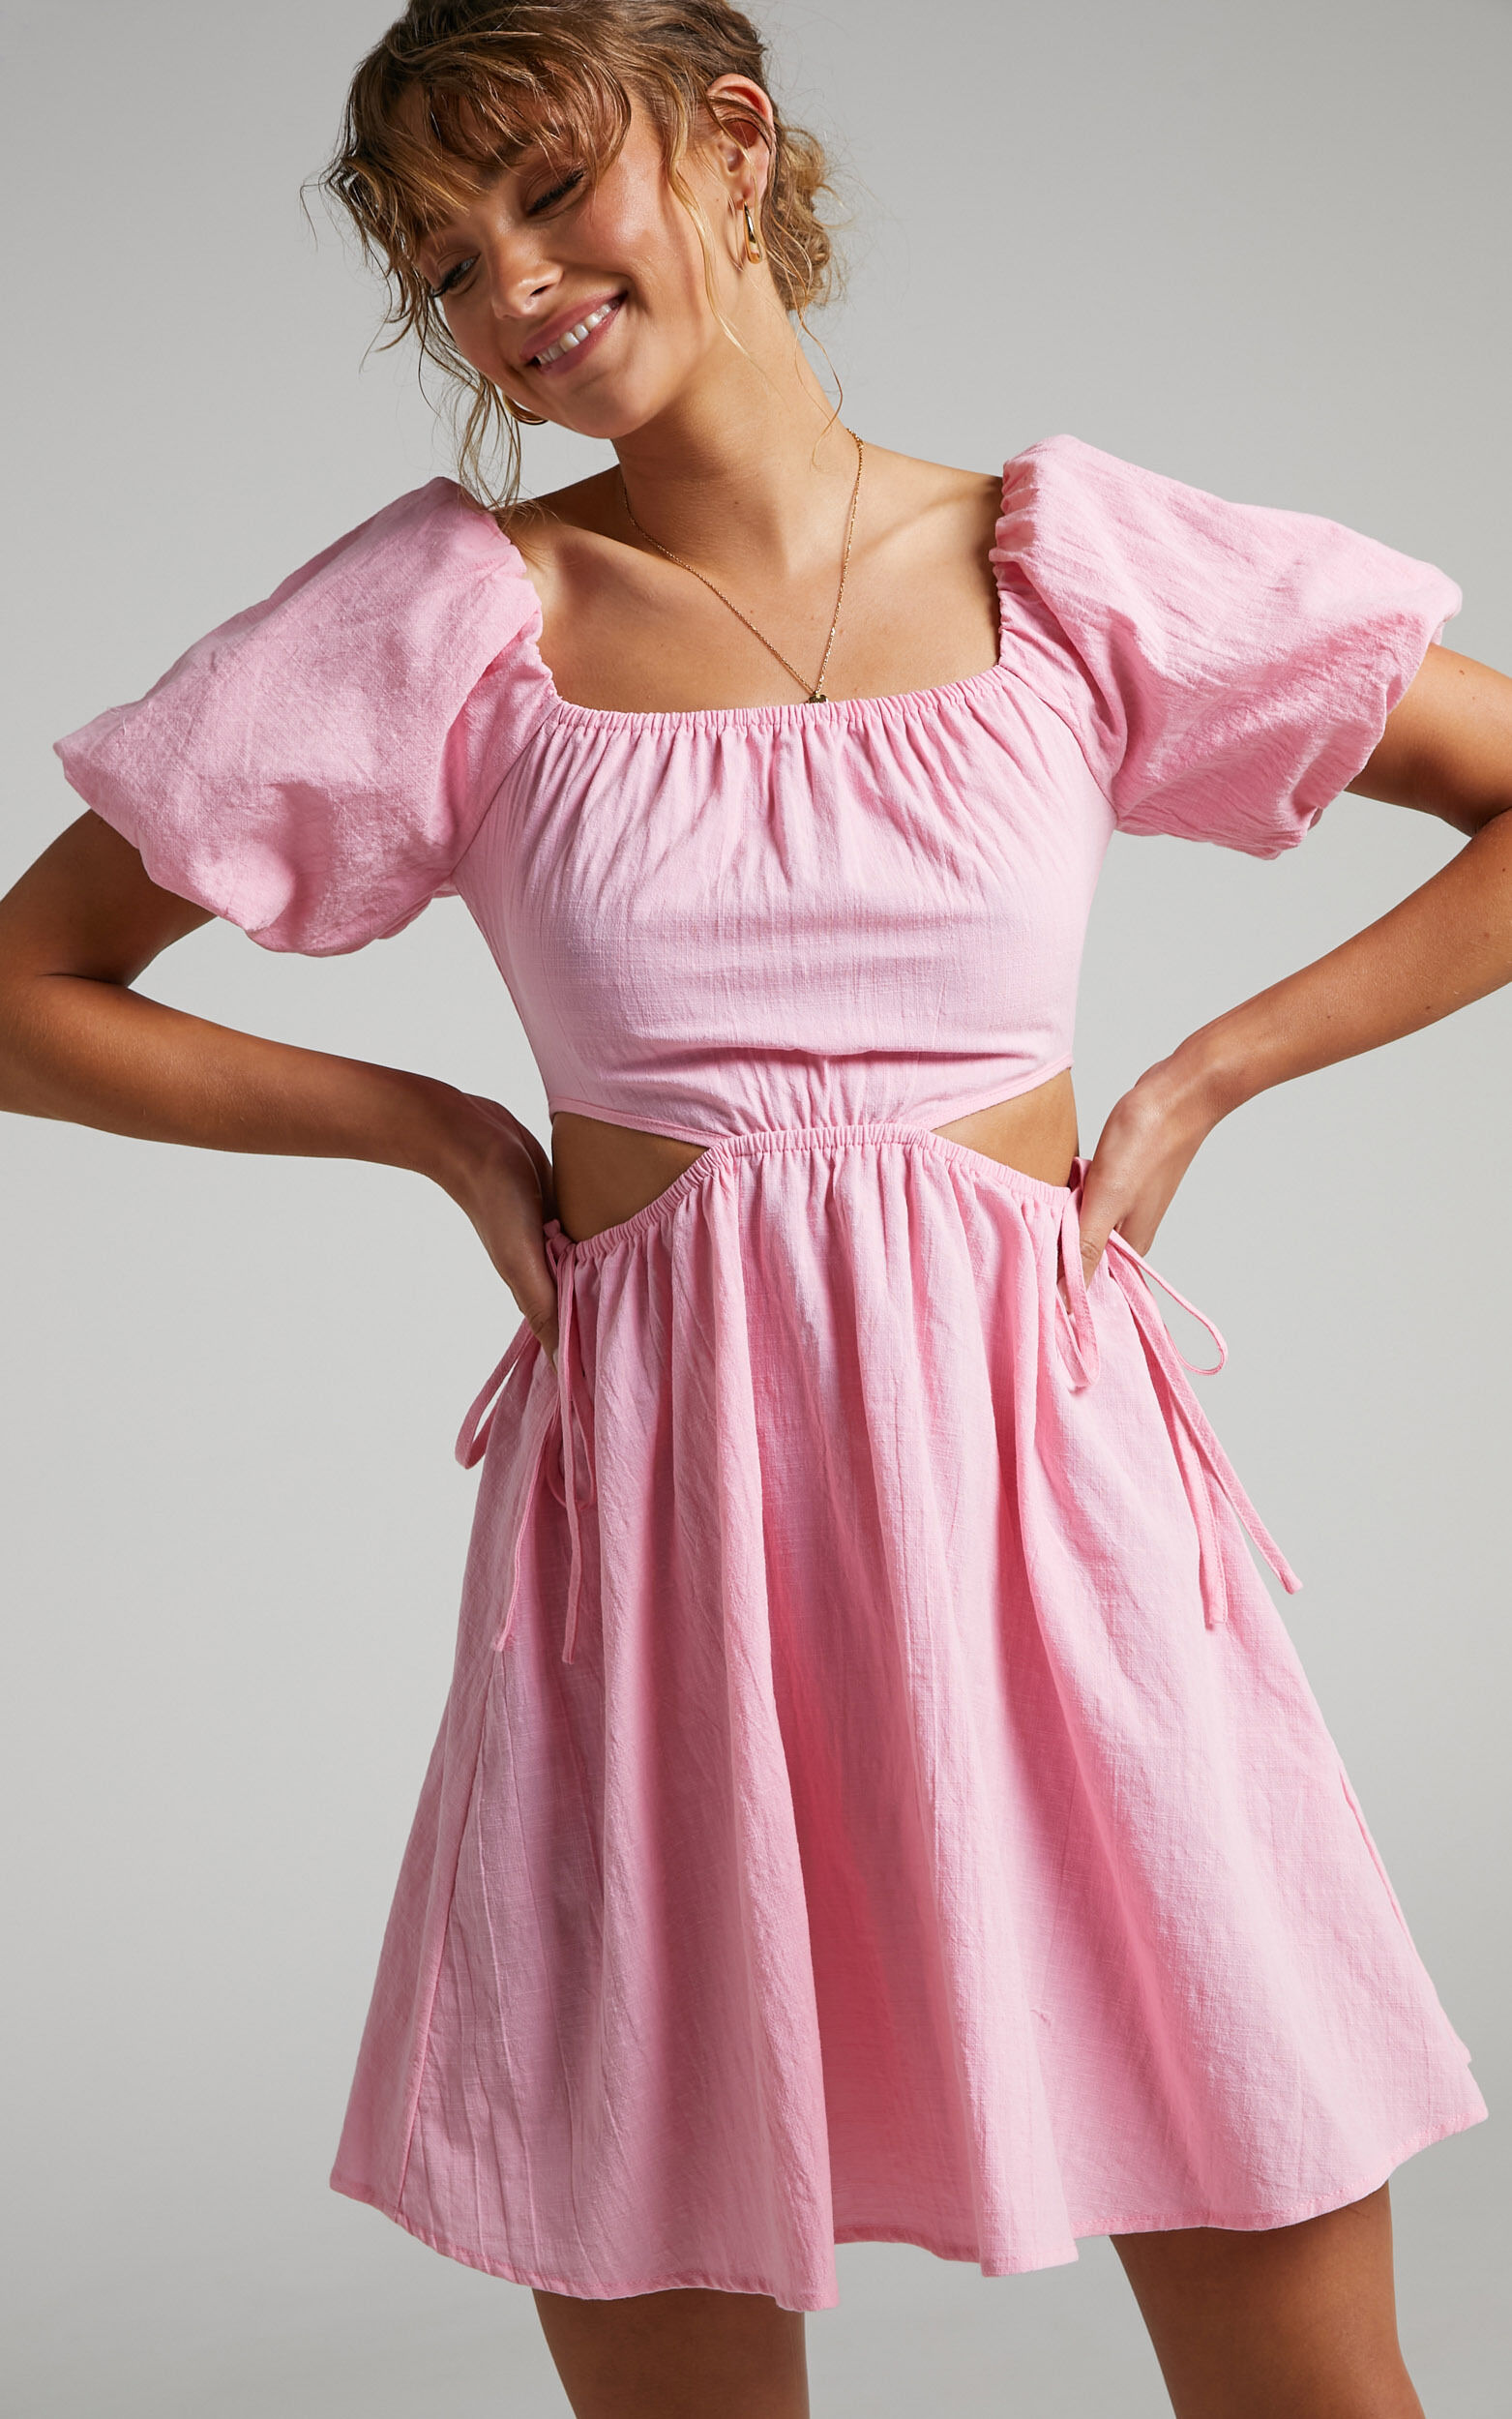 Loriella Waist Cut Out Skater Skirt Dress in Dusty Pink - 06, PNK1, super-hi-res image number null